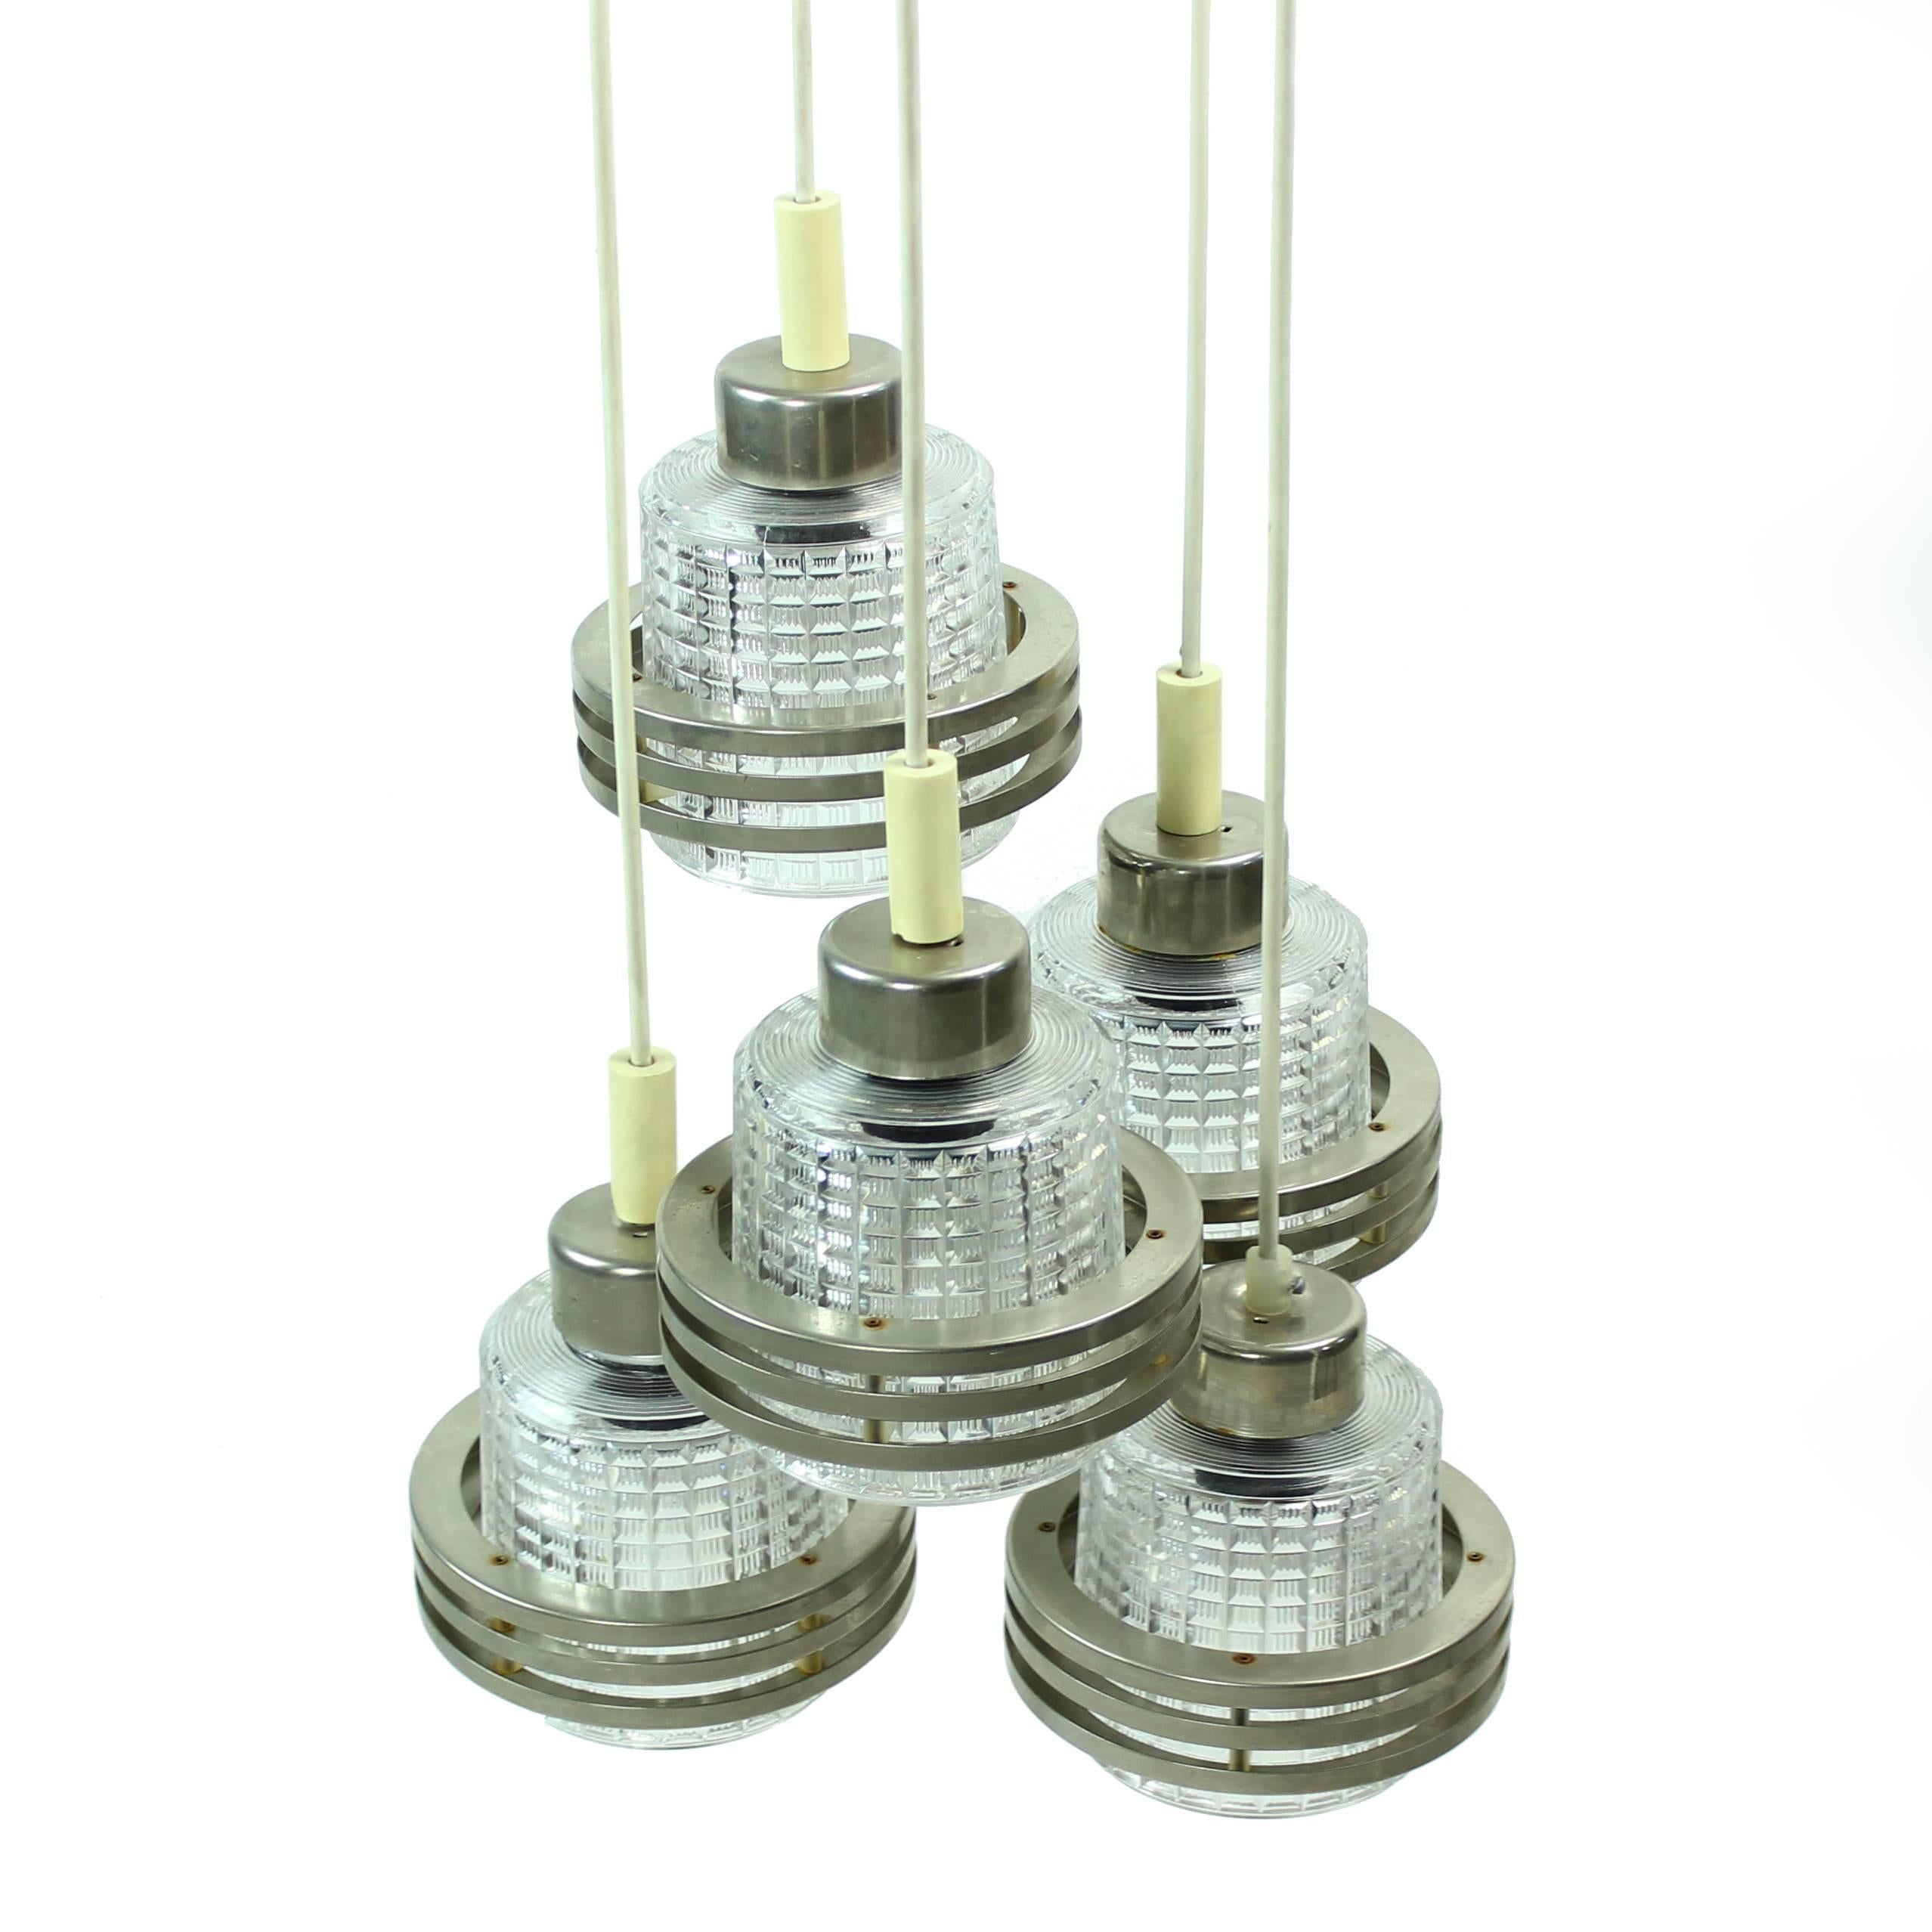 Ceiling pendant with five hanging lights. Each made of chrome metal and pressed glass. Stylish and elegant combination that never goes out of fashion. Very good condition.